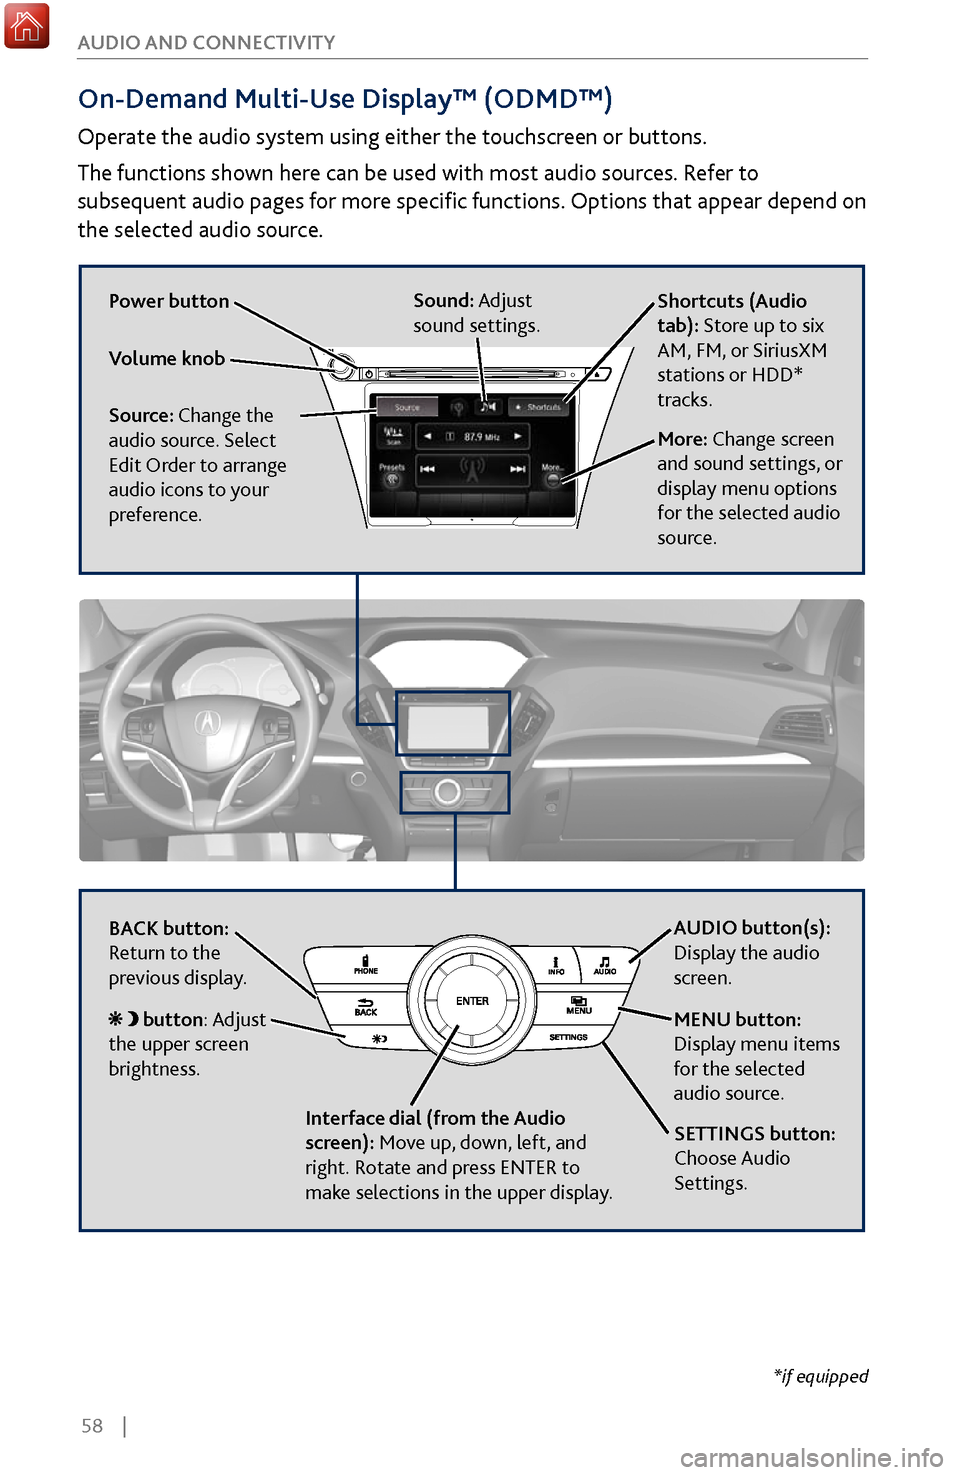 Acura MDX 2017 User Guide 58    |
AUDIO AND CONNECTIVITY
On-Demand Multi-Use Display™ (ODMD™)
Operate the audio system using either the touchscreen or buttons.
The functions shown here can be used with most audio sources. 